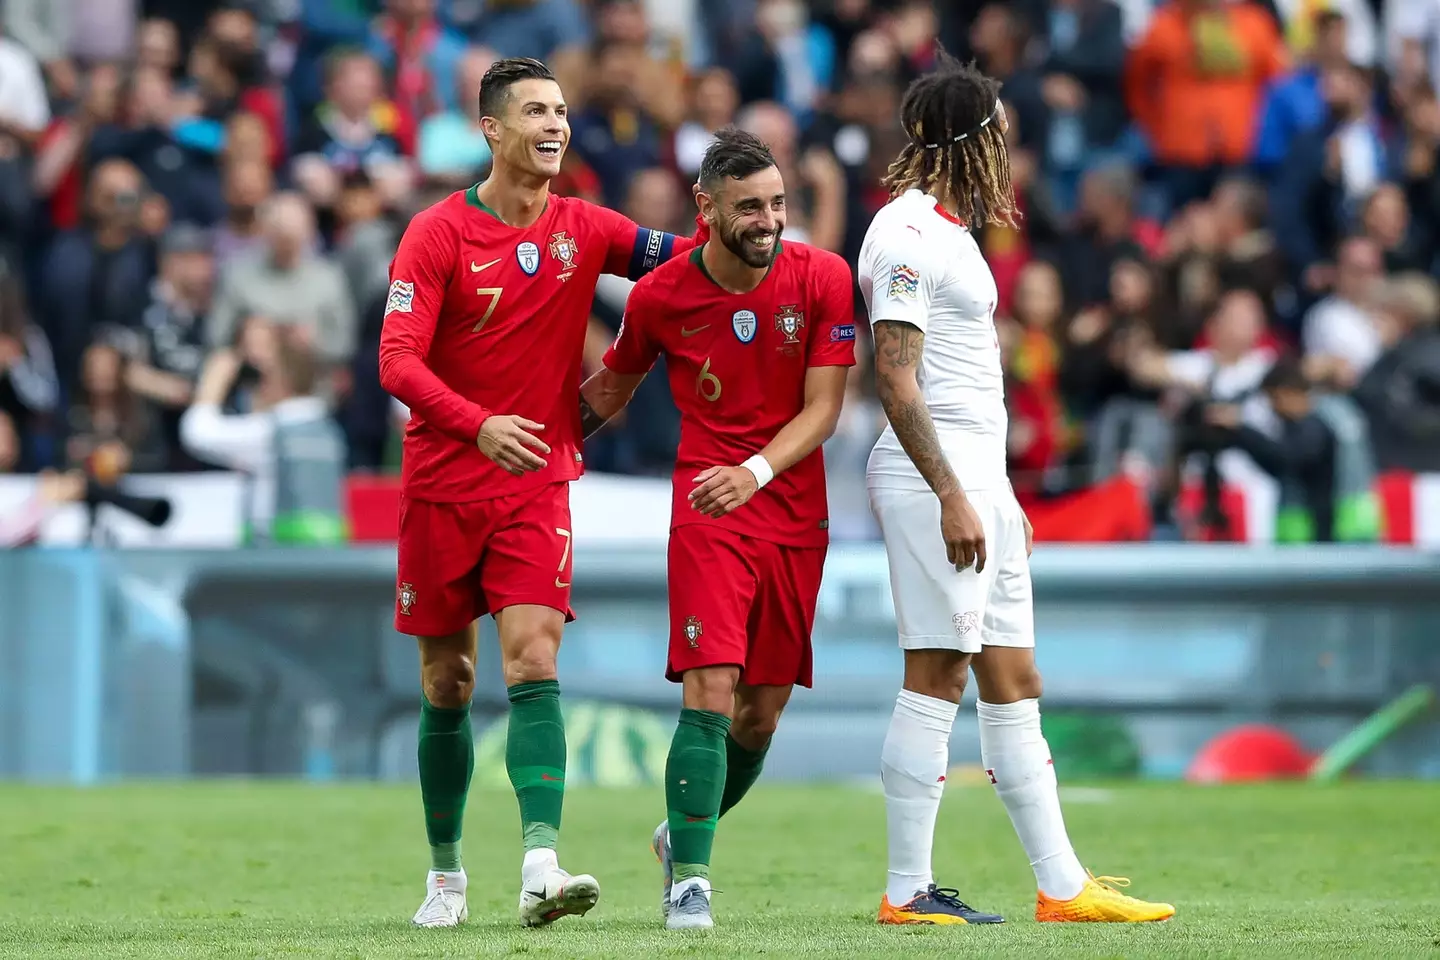 Ronaldo and Fernandes representing Portugal in 2019. (Image